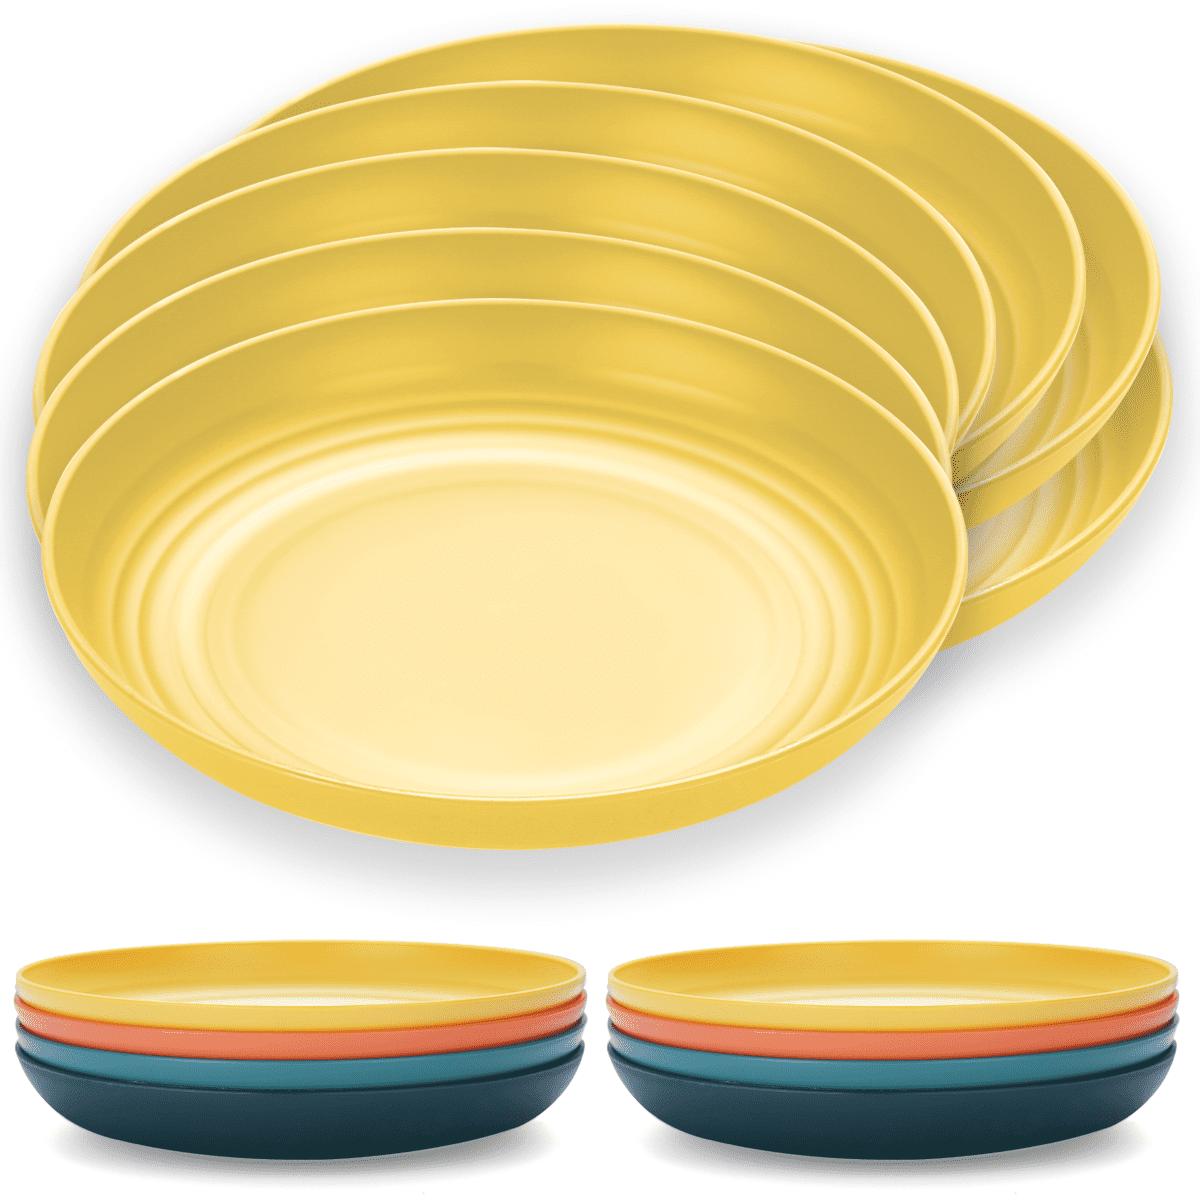 Details about   Reusable Blue Plastic Picnic Plates Set of 4 BPA-FREE 10" Wide FREE SHIPPING 